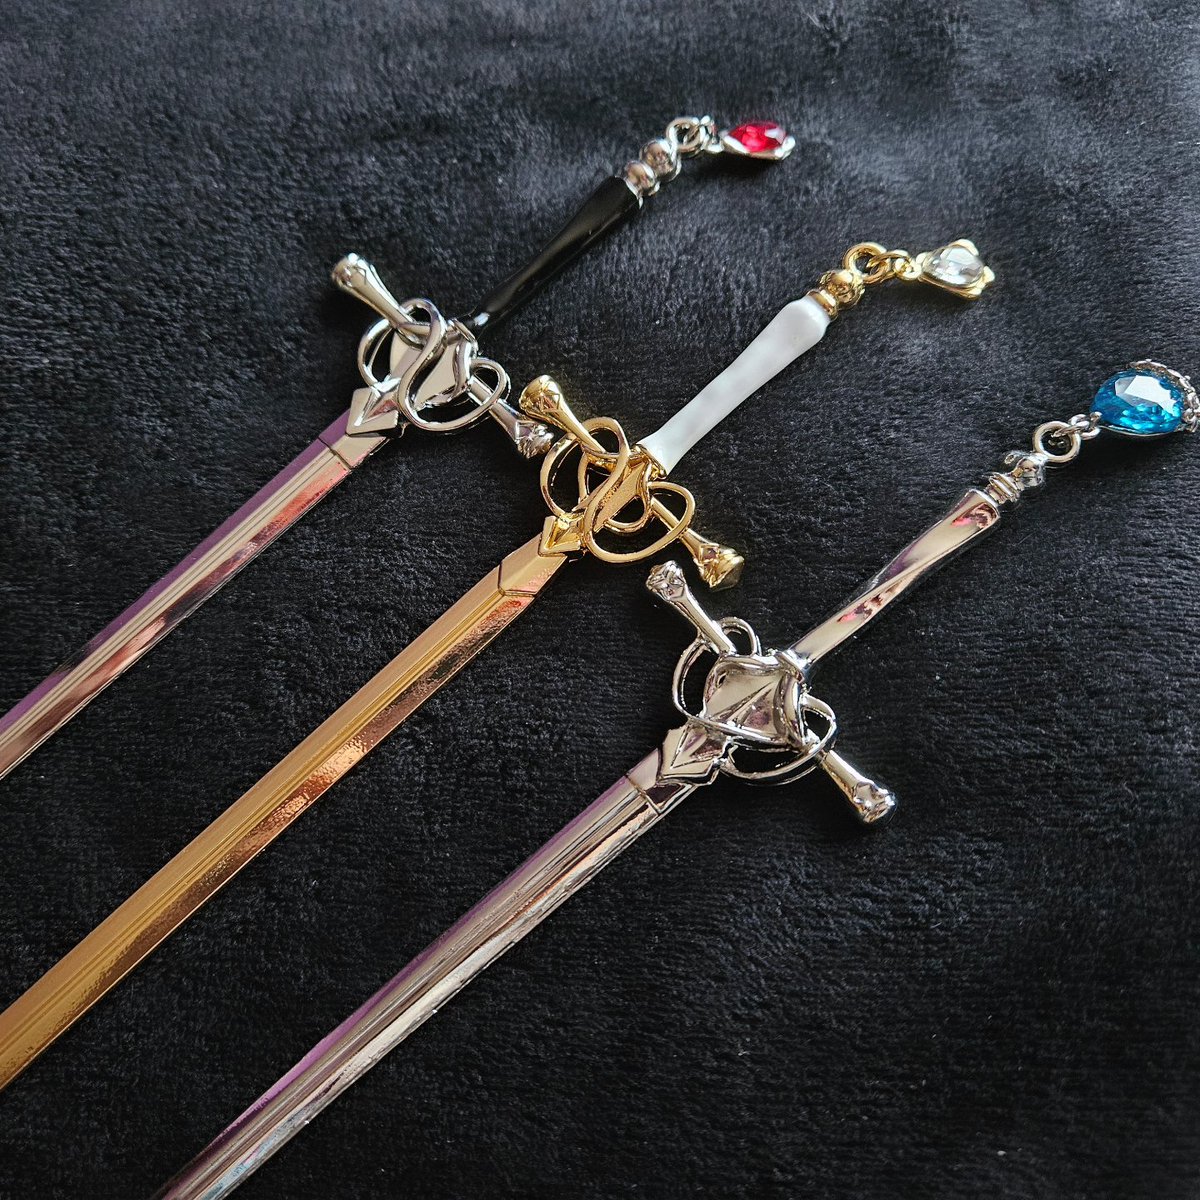 Summer is coming ⚔️

We have the ideal way to keep your hair off your neck and maintain your LARP or fantasy vibes! Sword hair pins available at tabletoptinkering.com

#smallbusiness #fantasy #hairaccessories #sword #dnd #renfaire